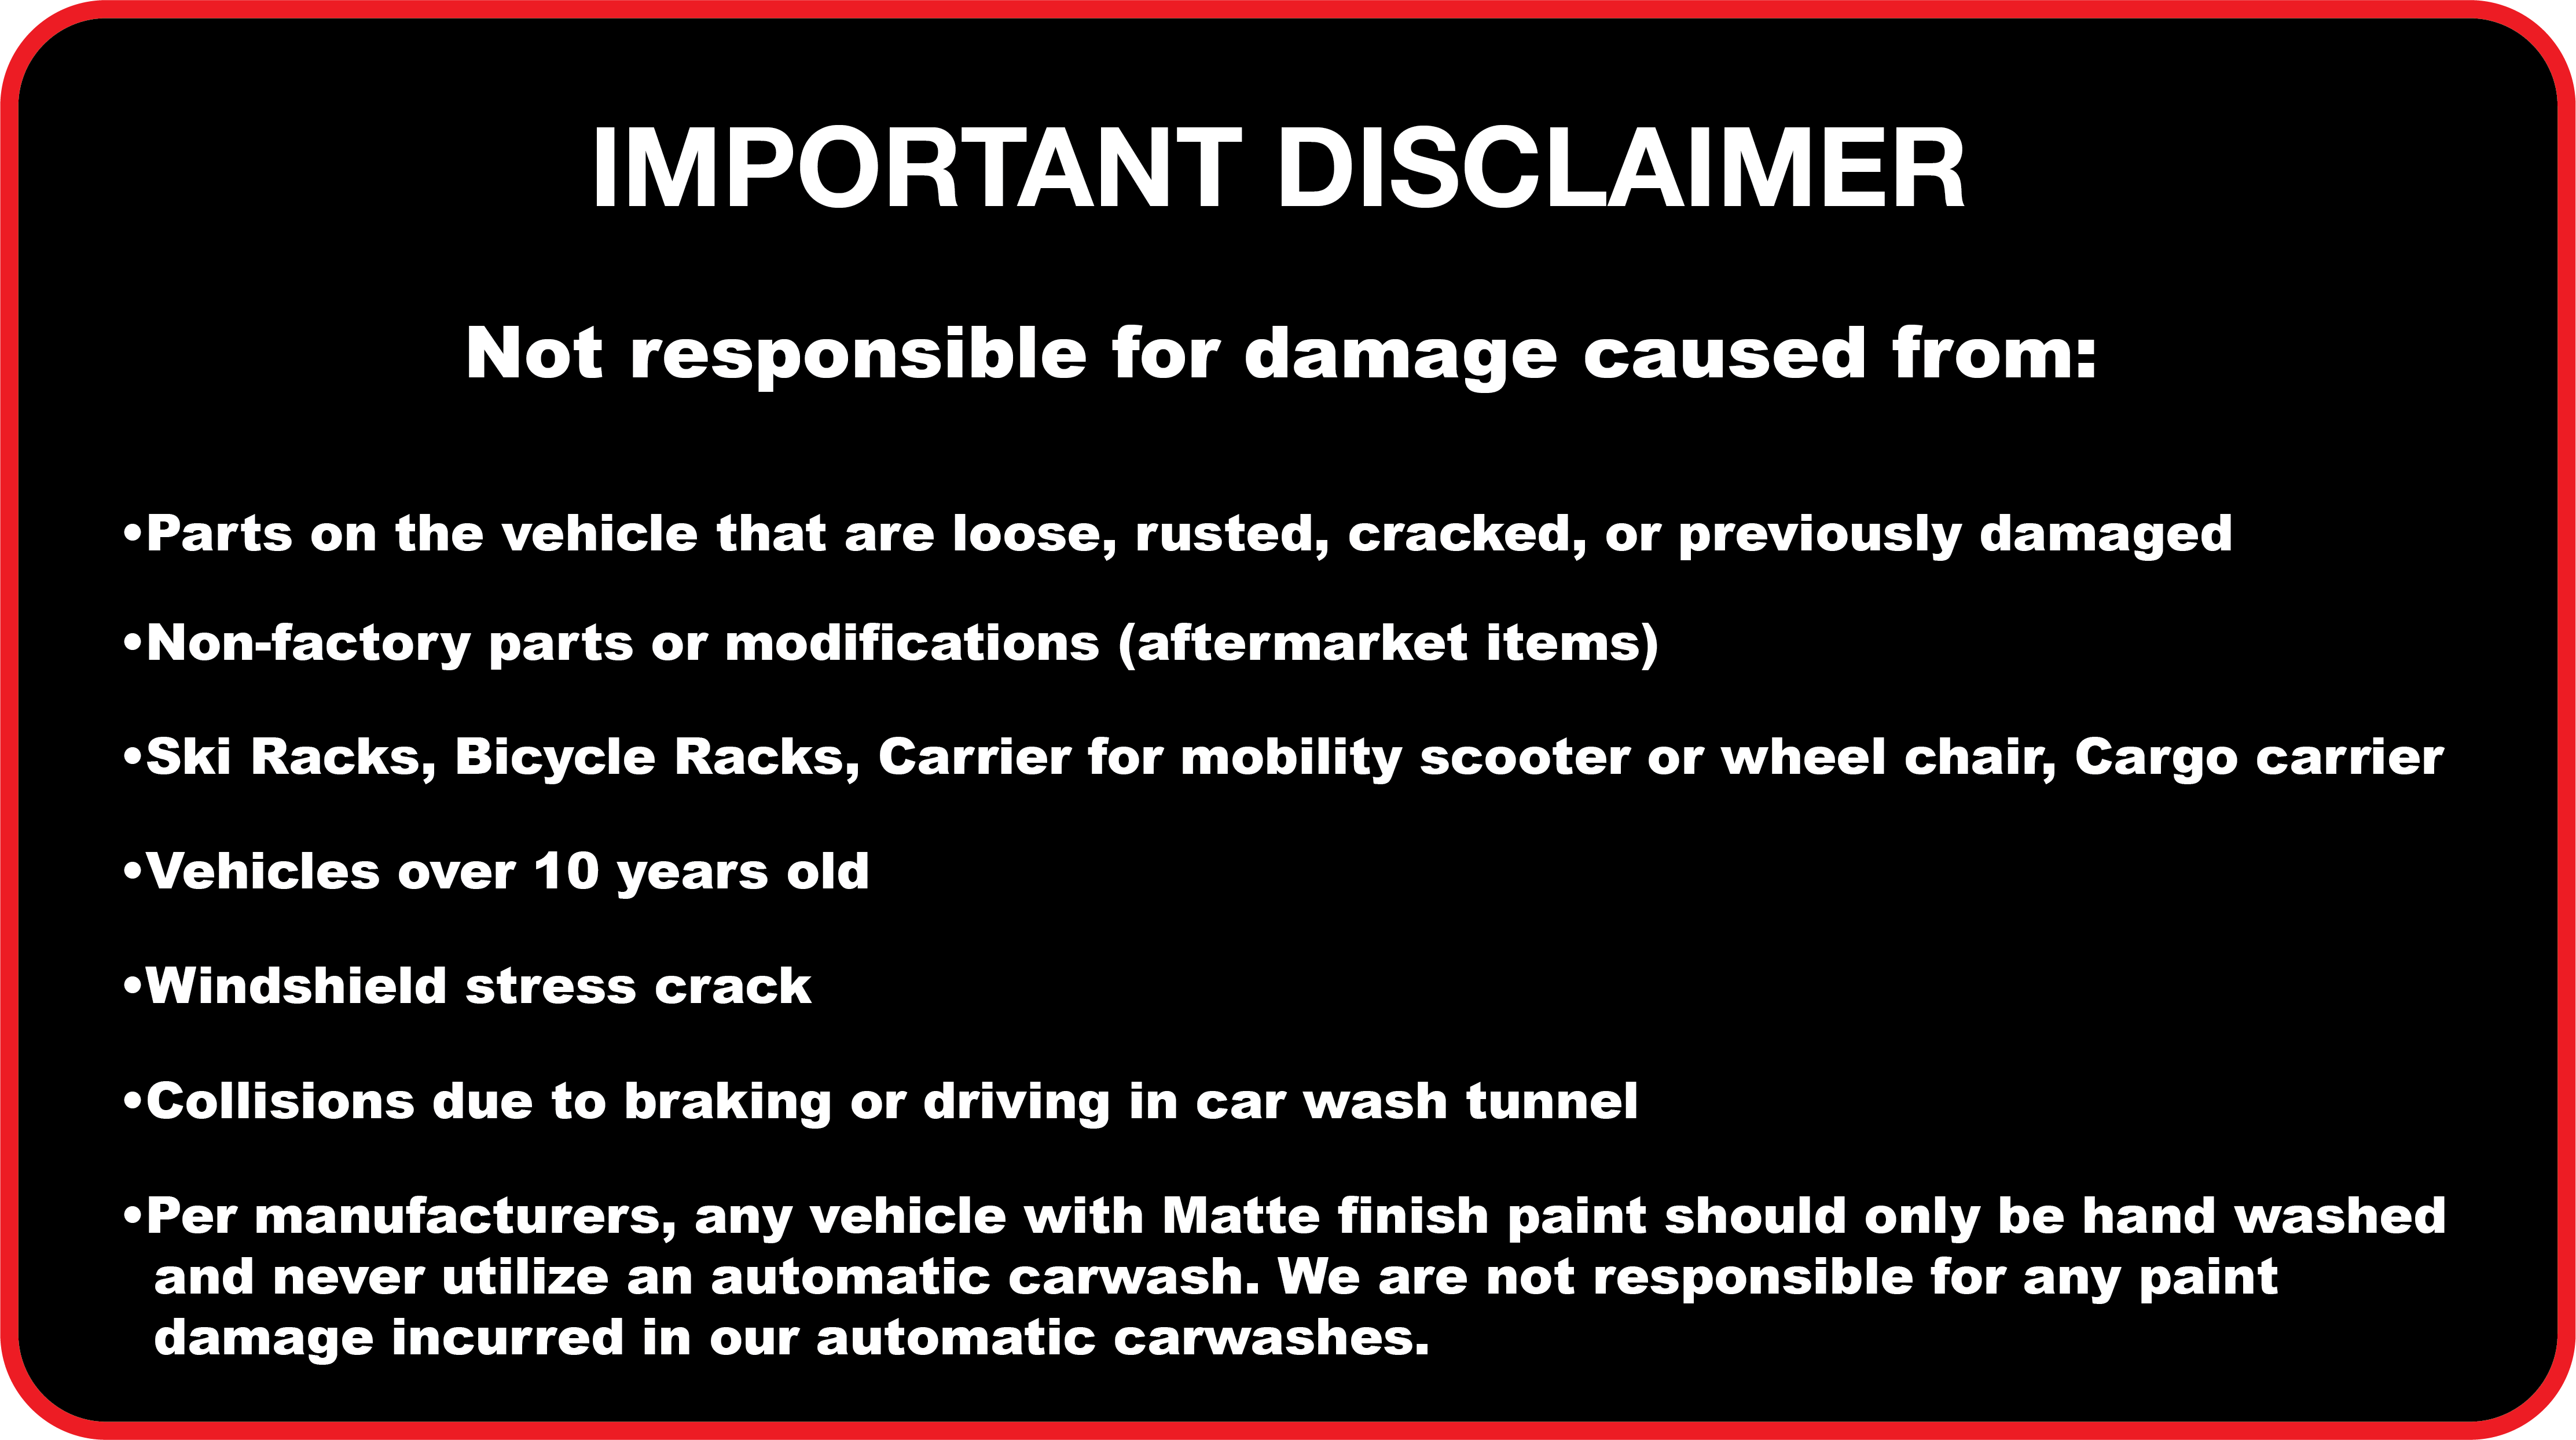 IMPORTANT DISCLAIMER
      Not responsible for damage caused from: Parts on the vehicle that are loose, rusted, cracked, or previously damaged. Non-factory parts or modifications (aftermarket items). Ski Racks, Bicycle Racks, Carrier for mobility scooter or wheel chair, Cargo carrier. Vehicles over 10 years old. Windshield stress crack. Collisions due to braking or driving in car wash tunnel. Per manufacturers, any vehicle with Matte finish paint should only be hand washed and never utilize an automatic carwash. We are not responsible for any paint damage incurred in our automatic carwashes.